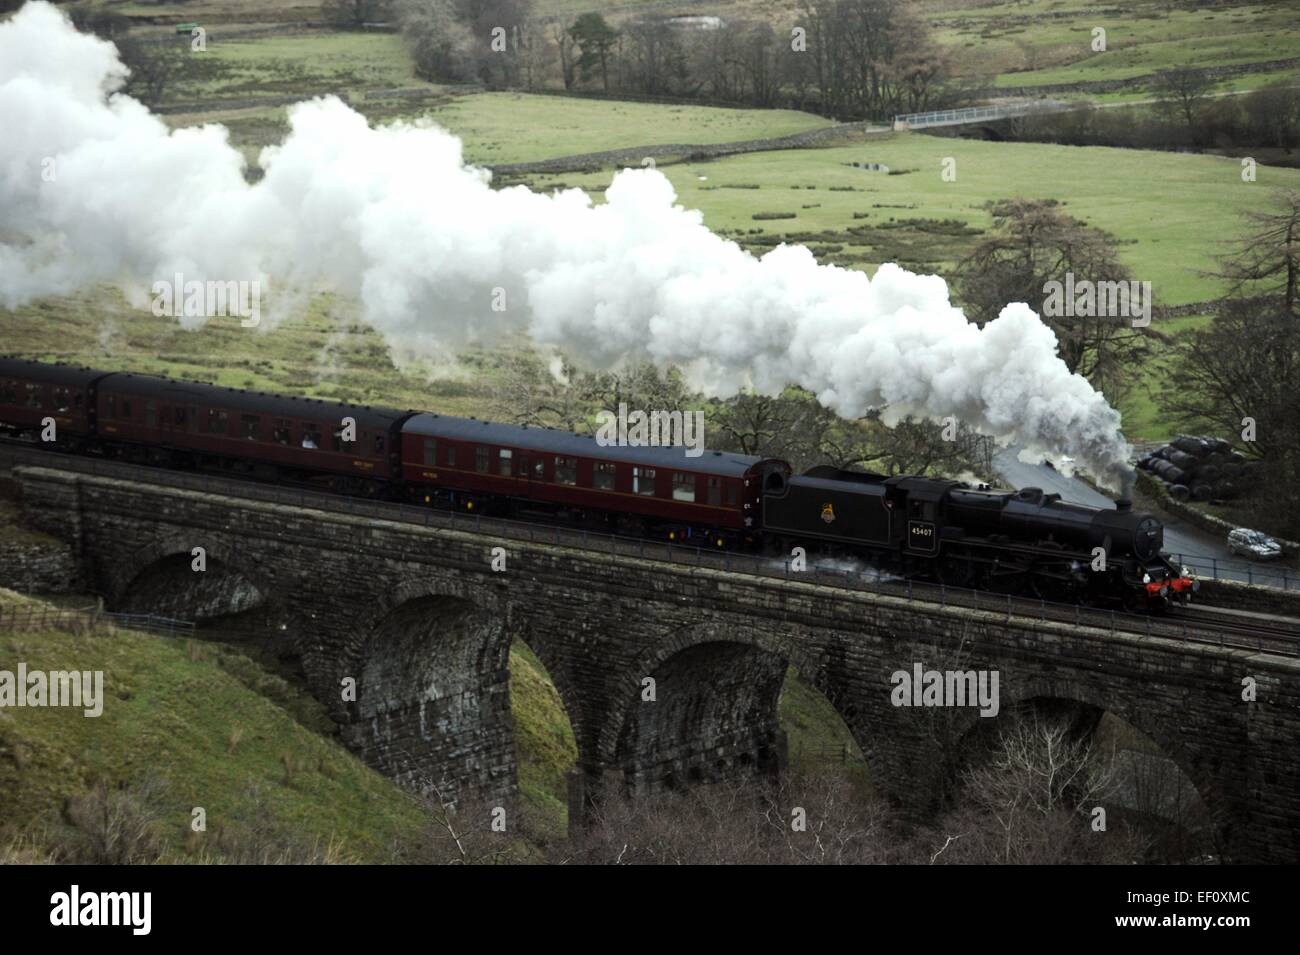 Pennines, Cumbria, UK. 24th January, 2015. UK milder weather. The Cumbrian Winter Mountain Express steams through the melting snow of the Pennines of Cumbria as temperatures get milder. The first special steam hauled train of 2015 on the historic Carlisle to Settle railway line. Locomotive No. 45407 'The Lancashire Fusilier' climbs over Ais Gill Viaduct making a good head of steam on the long climb to the summit of Ais Gill which at 1,169 feet is the highest railway summit in England.   Credit:  STUART WALKER/Alamy Live News Stock Photo